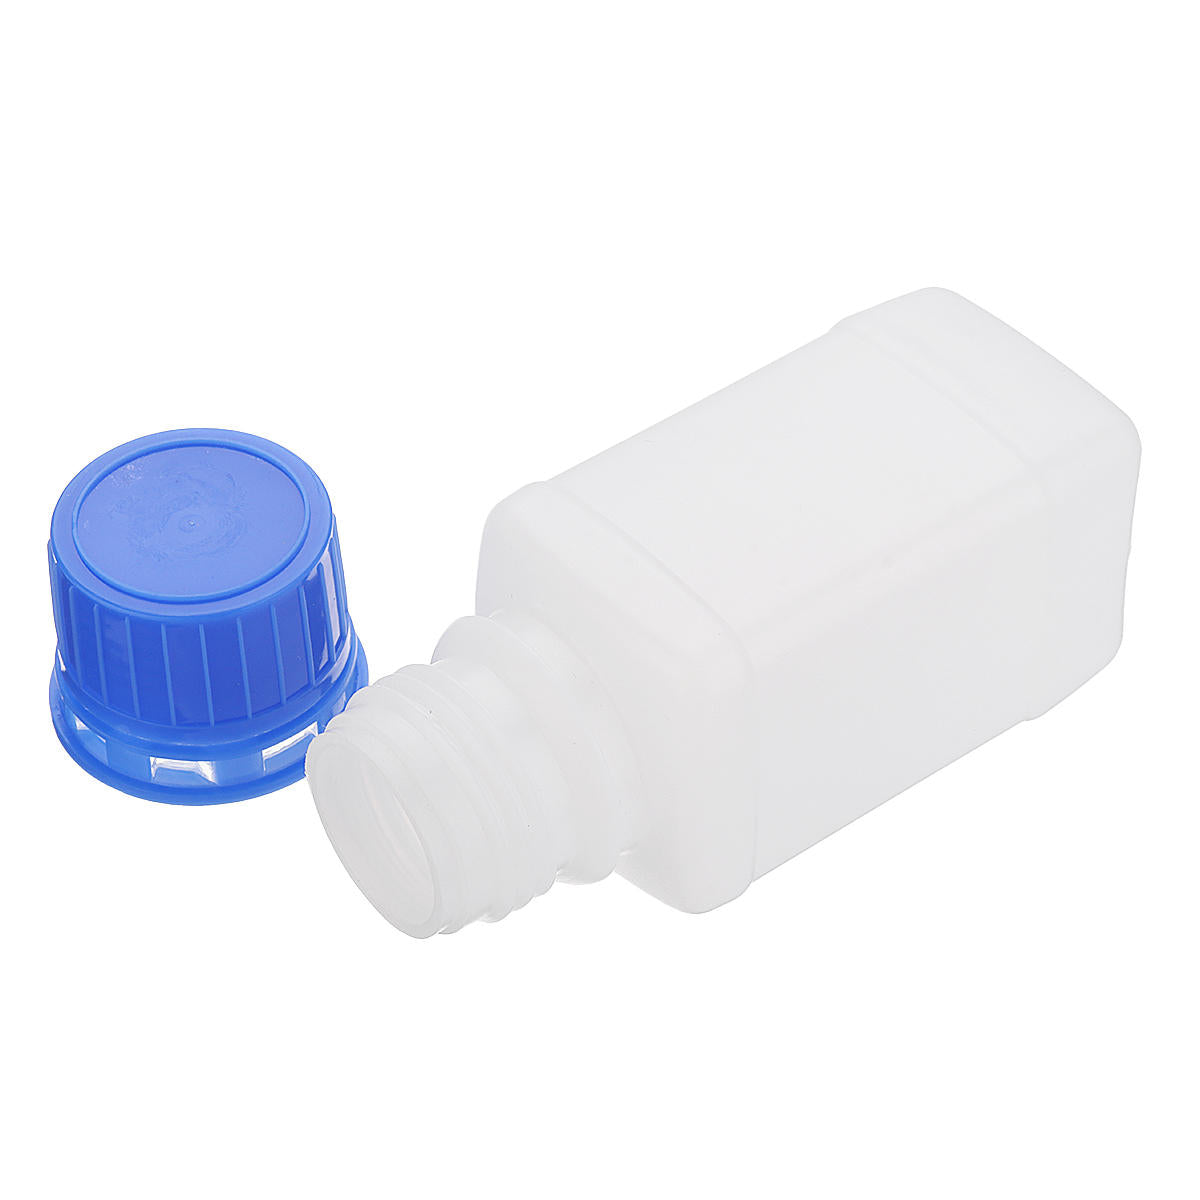 100/250/500ml Plastic Square Sample Sealing Bottle Wide Mouth Reagent Bottles with Blue Screw Cap Laboratory Experiment